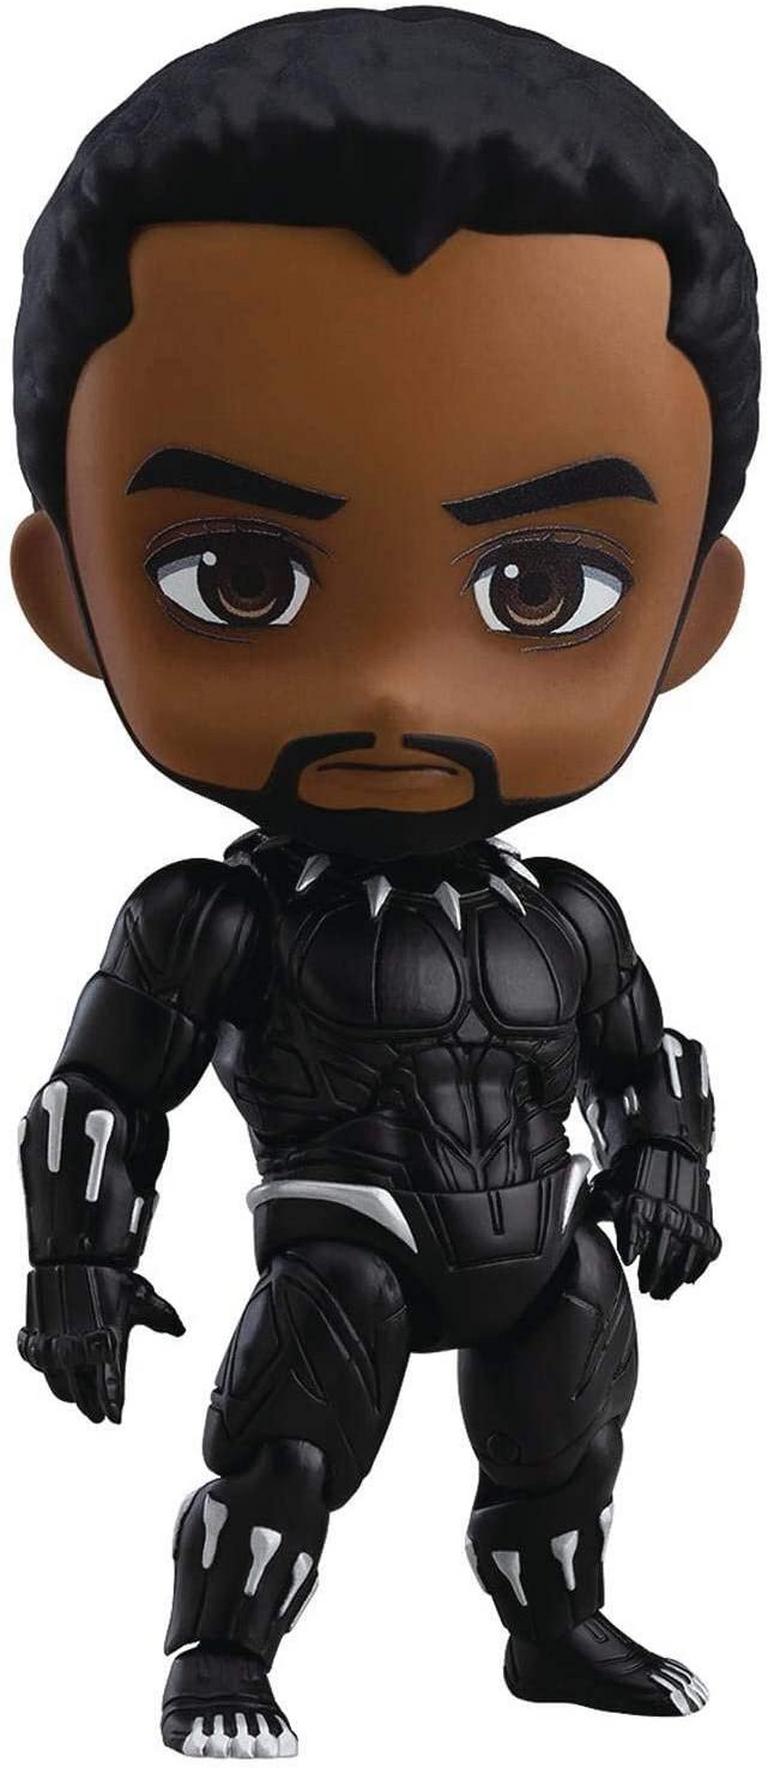 Good Smile Company Avengers: Infinity War - Black Panther: Infinity Edition DX Ver. Nendoroid Figure